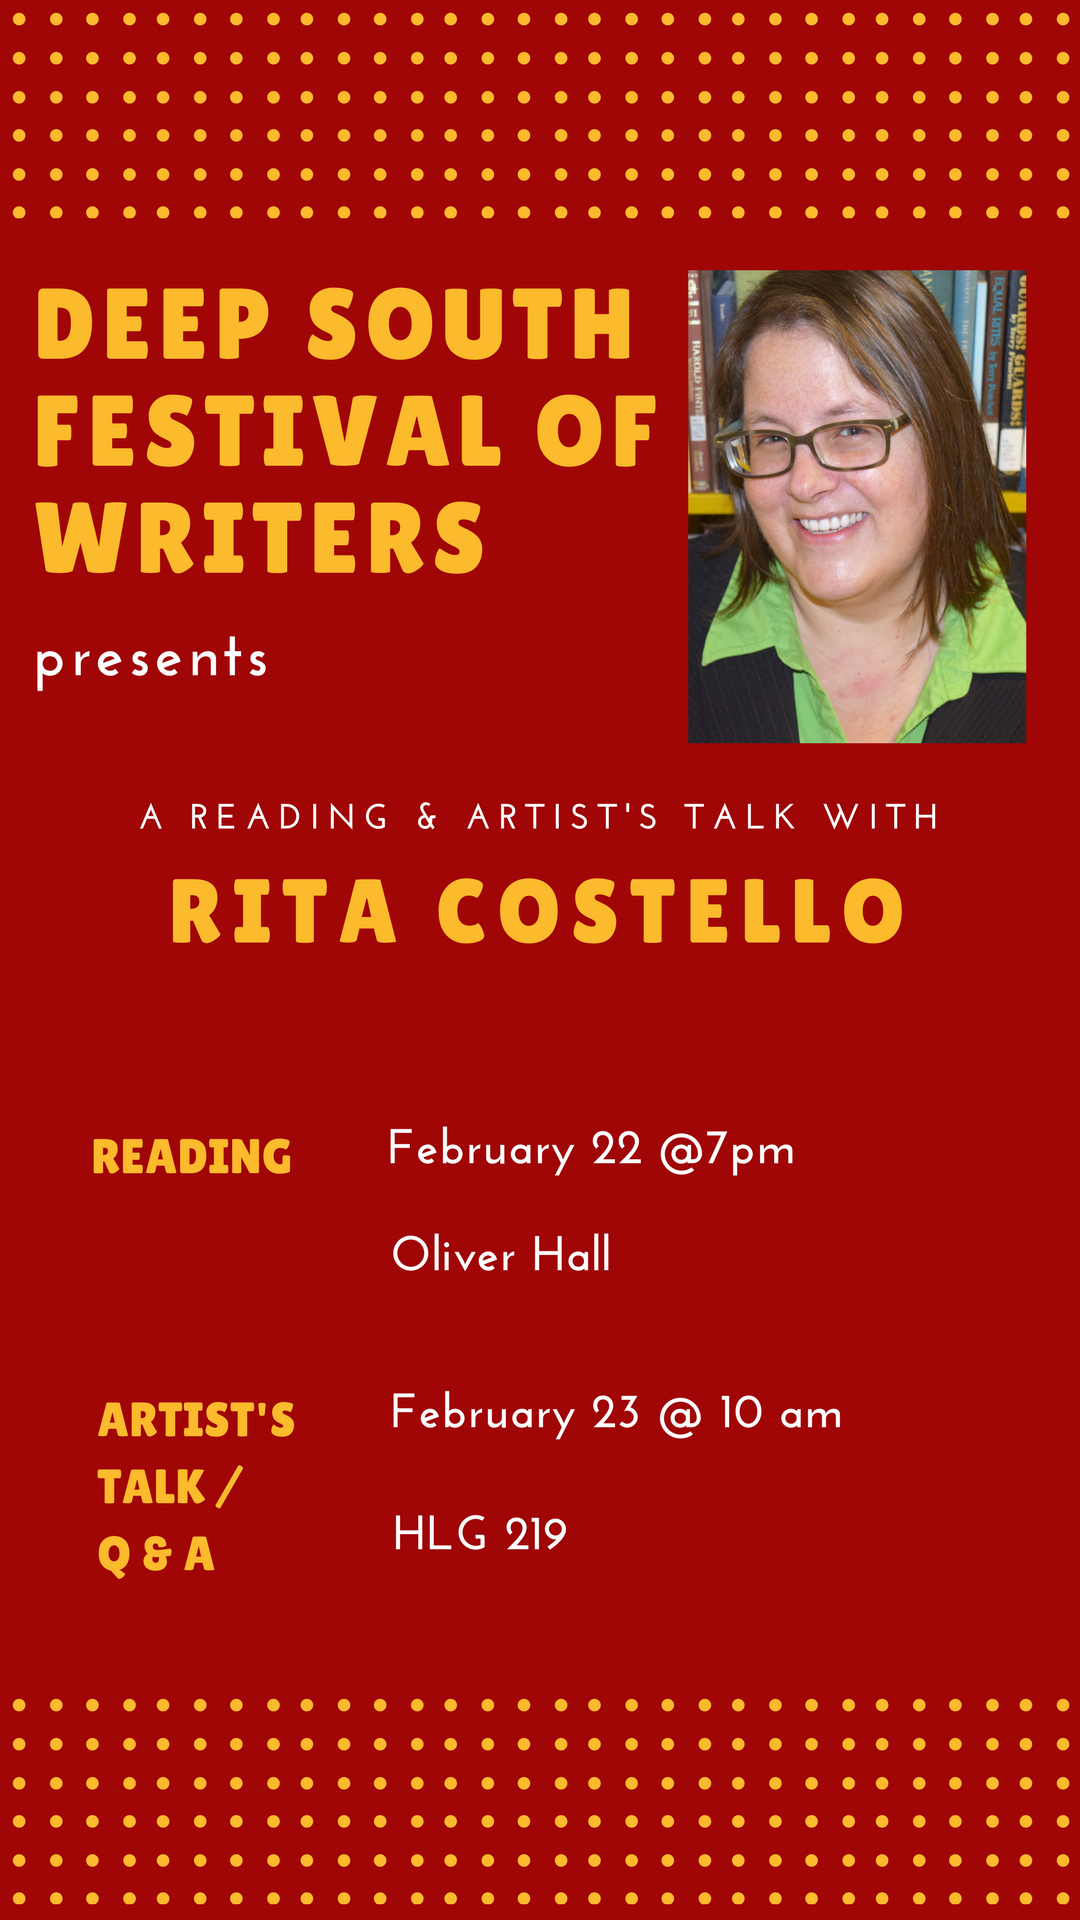 Deep South Festival of Writers with Rita Costello